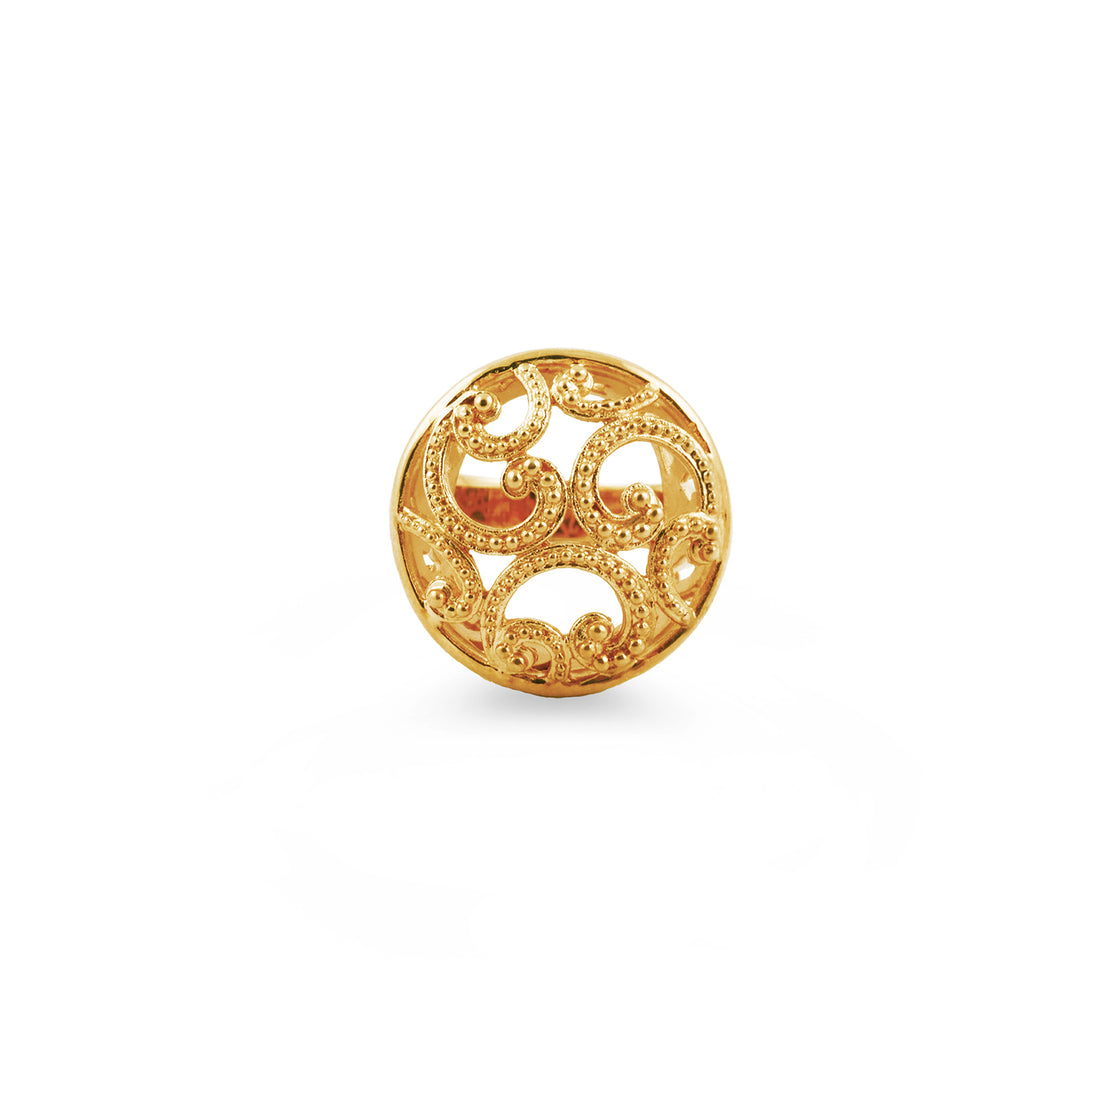 Bali Collection Ombak Segara 22kt Gold Plated Domed Ring